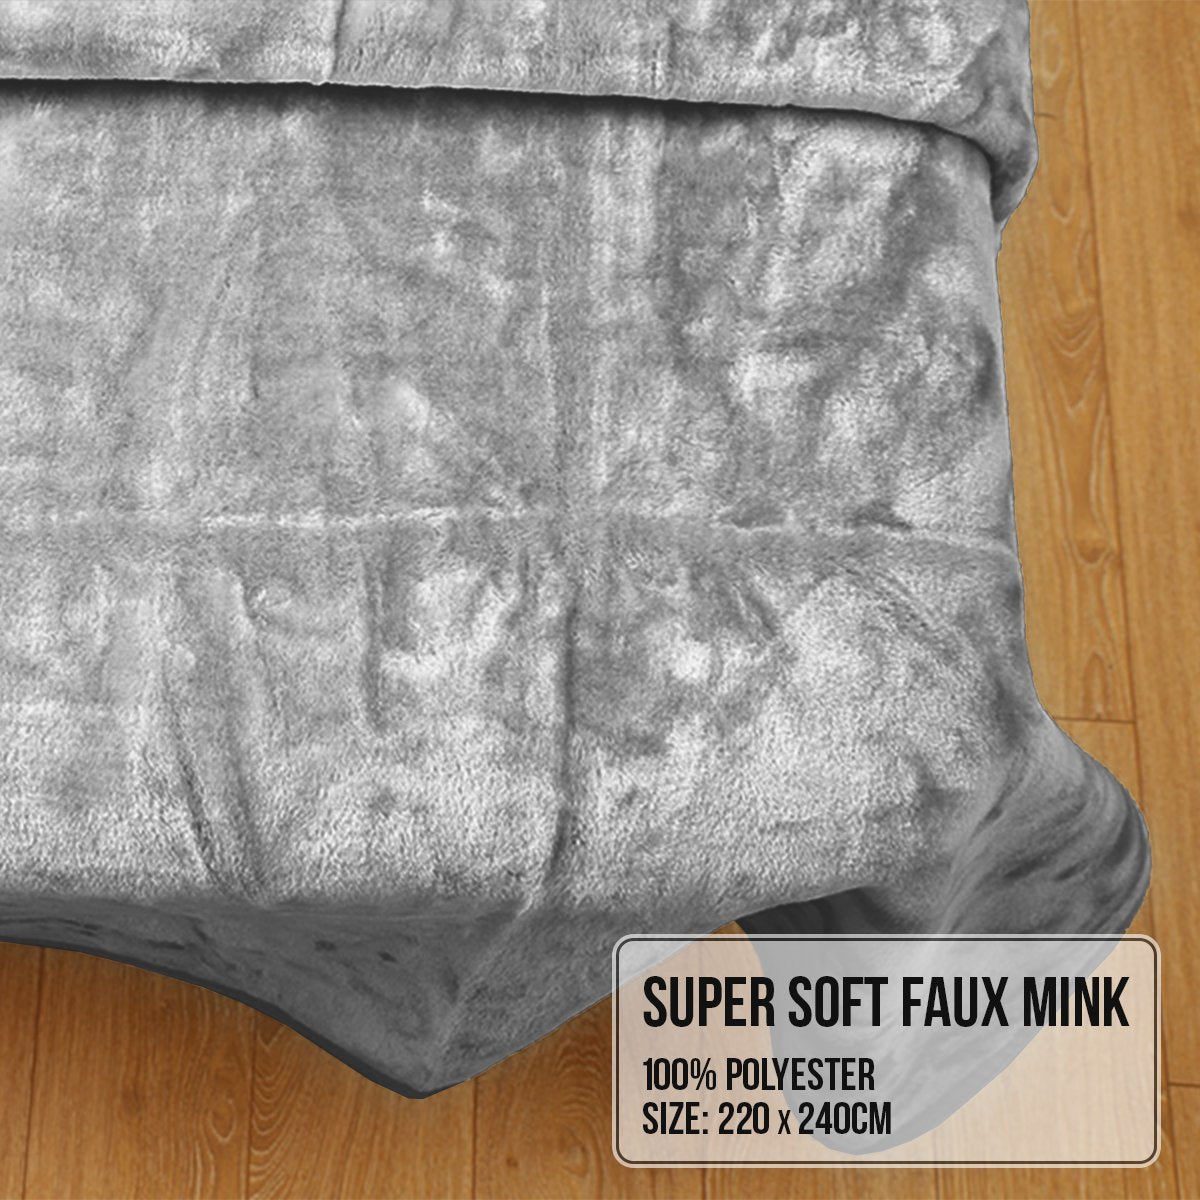 Laura Hill Mink Blanket Double Sided Queen Size Soft Plush Bed Faux Throw Rug 220 X 240cm - BM House & Garden